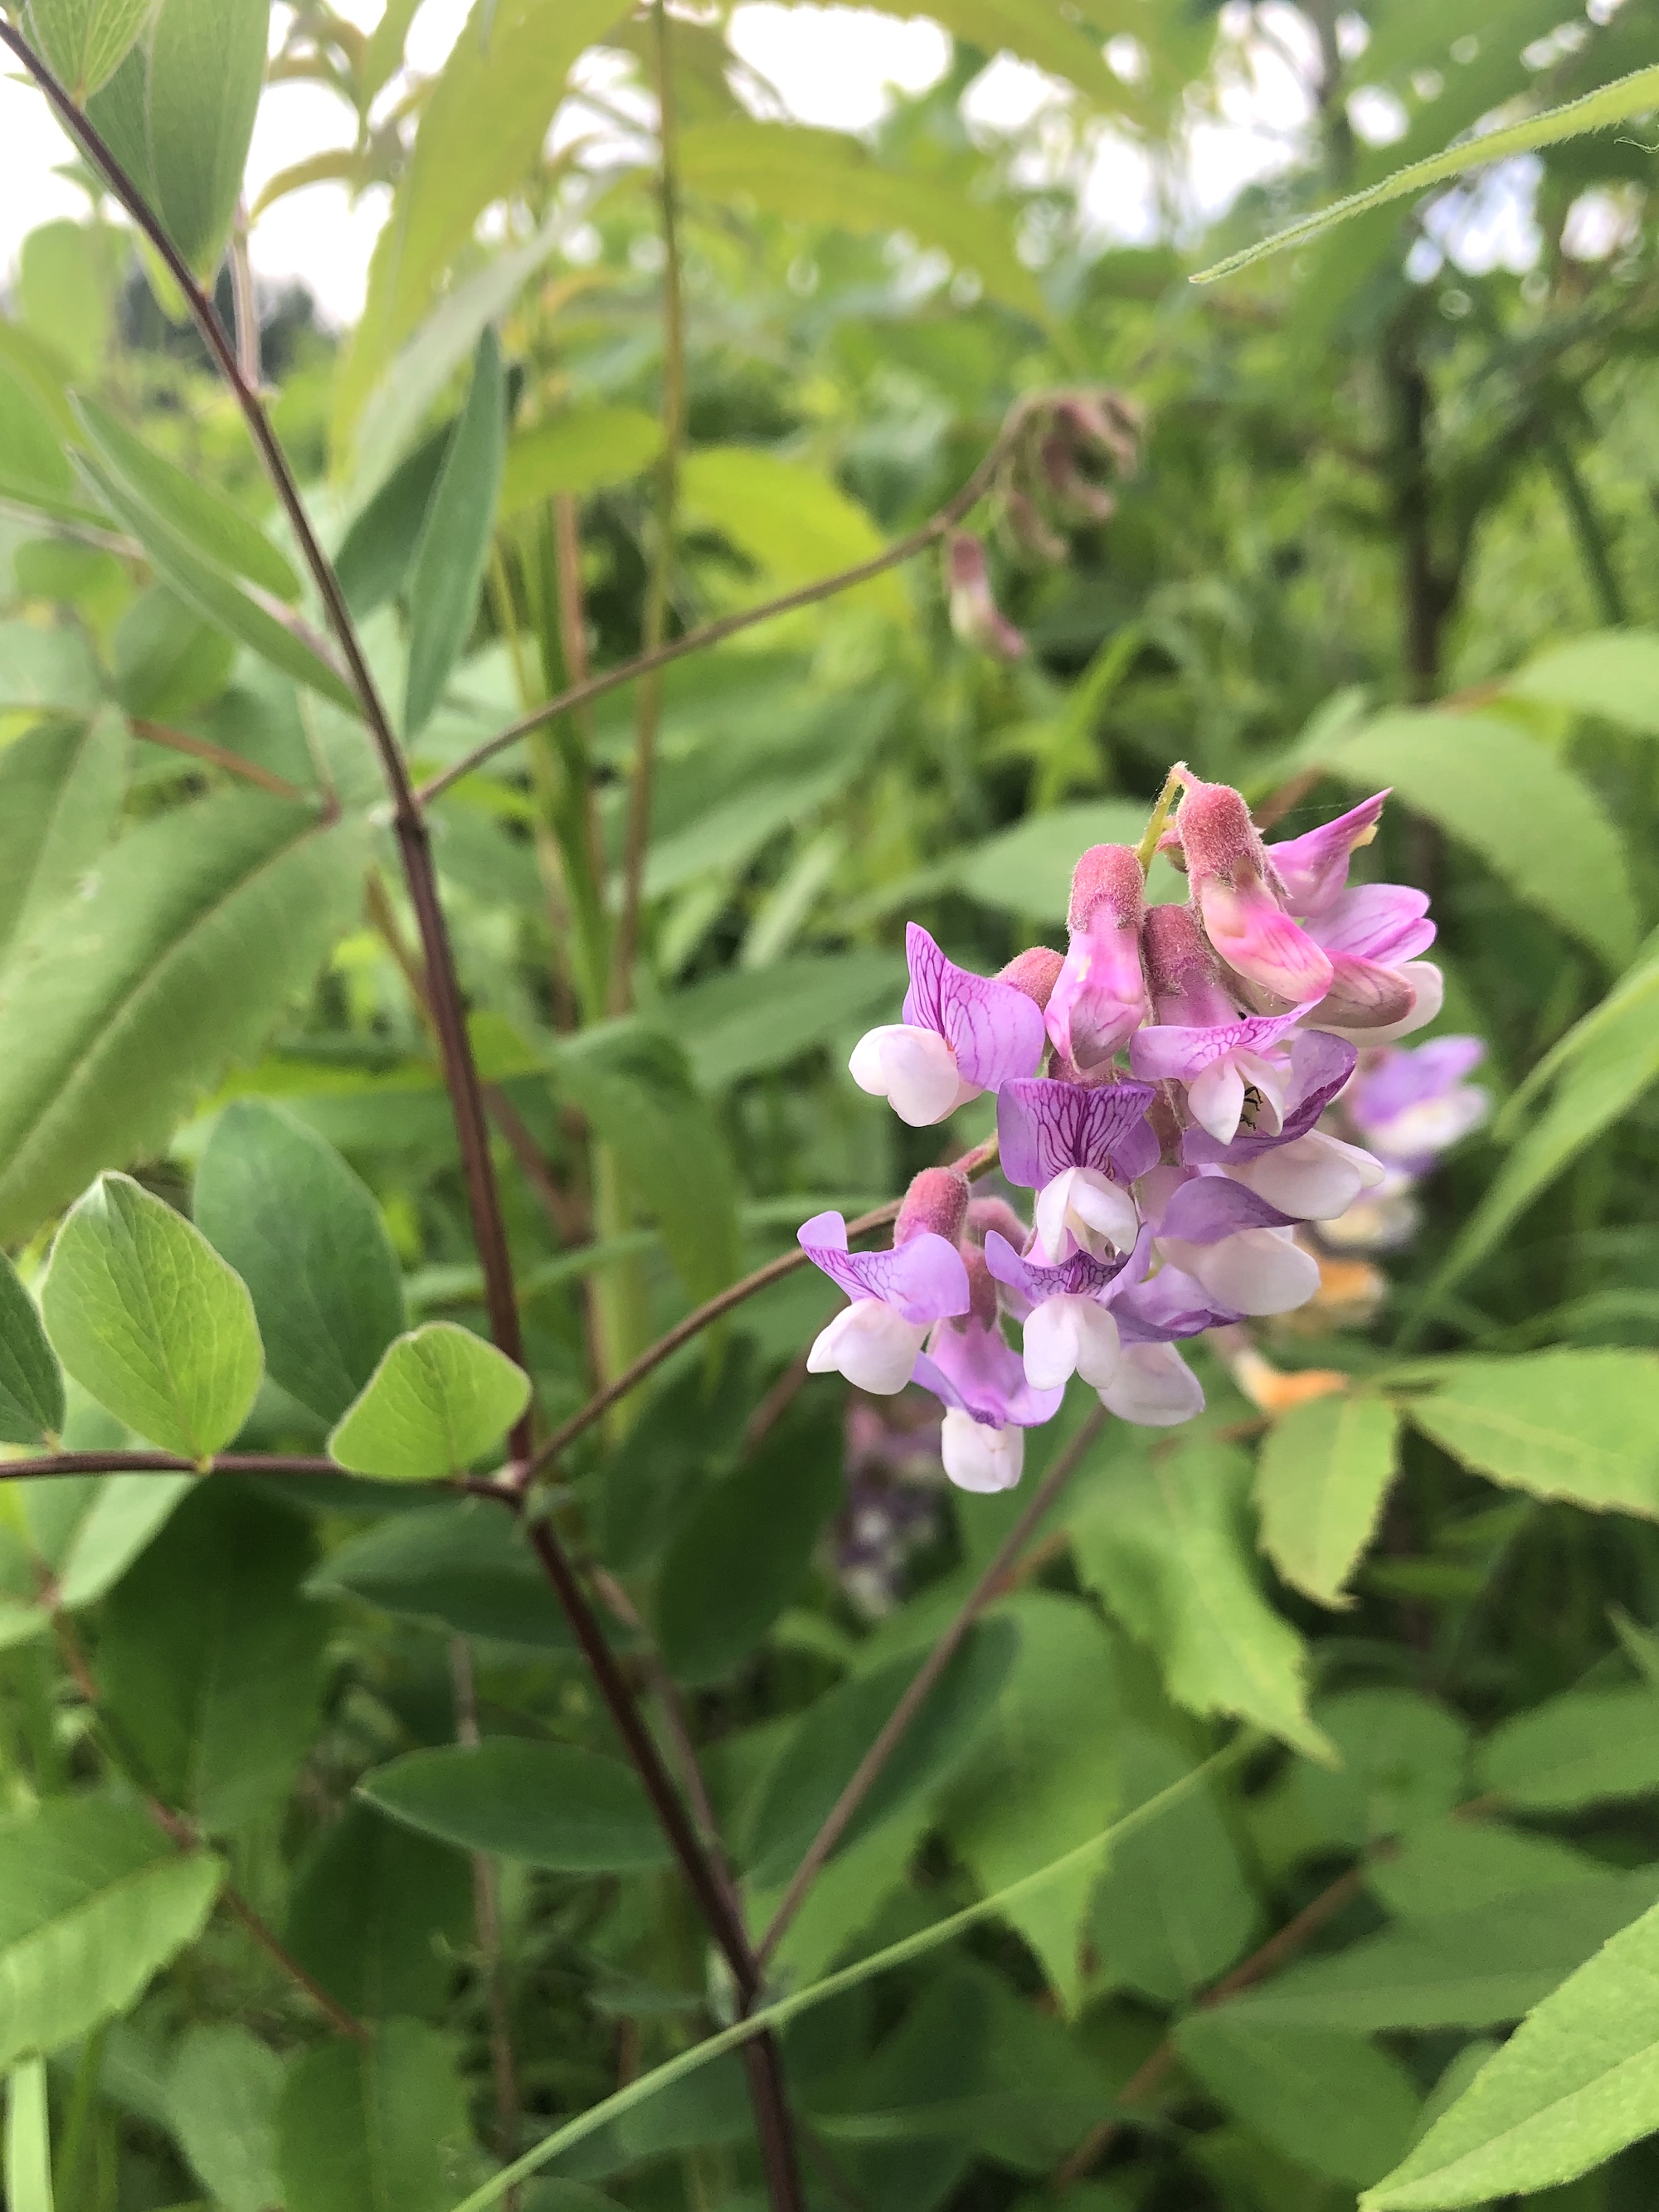 Veiny Pea in the Curtis Prairie in the University of Wisconsin-Madison Arboretum in Madison, Wisconsin on June 7, 2022.